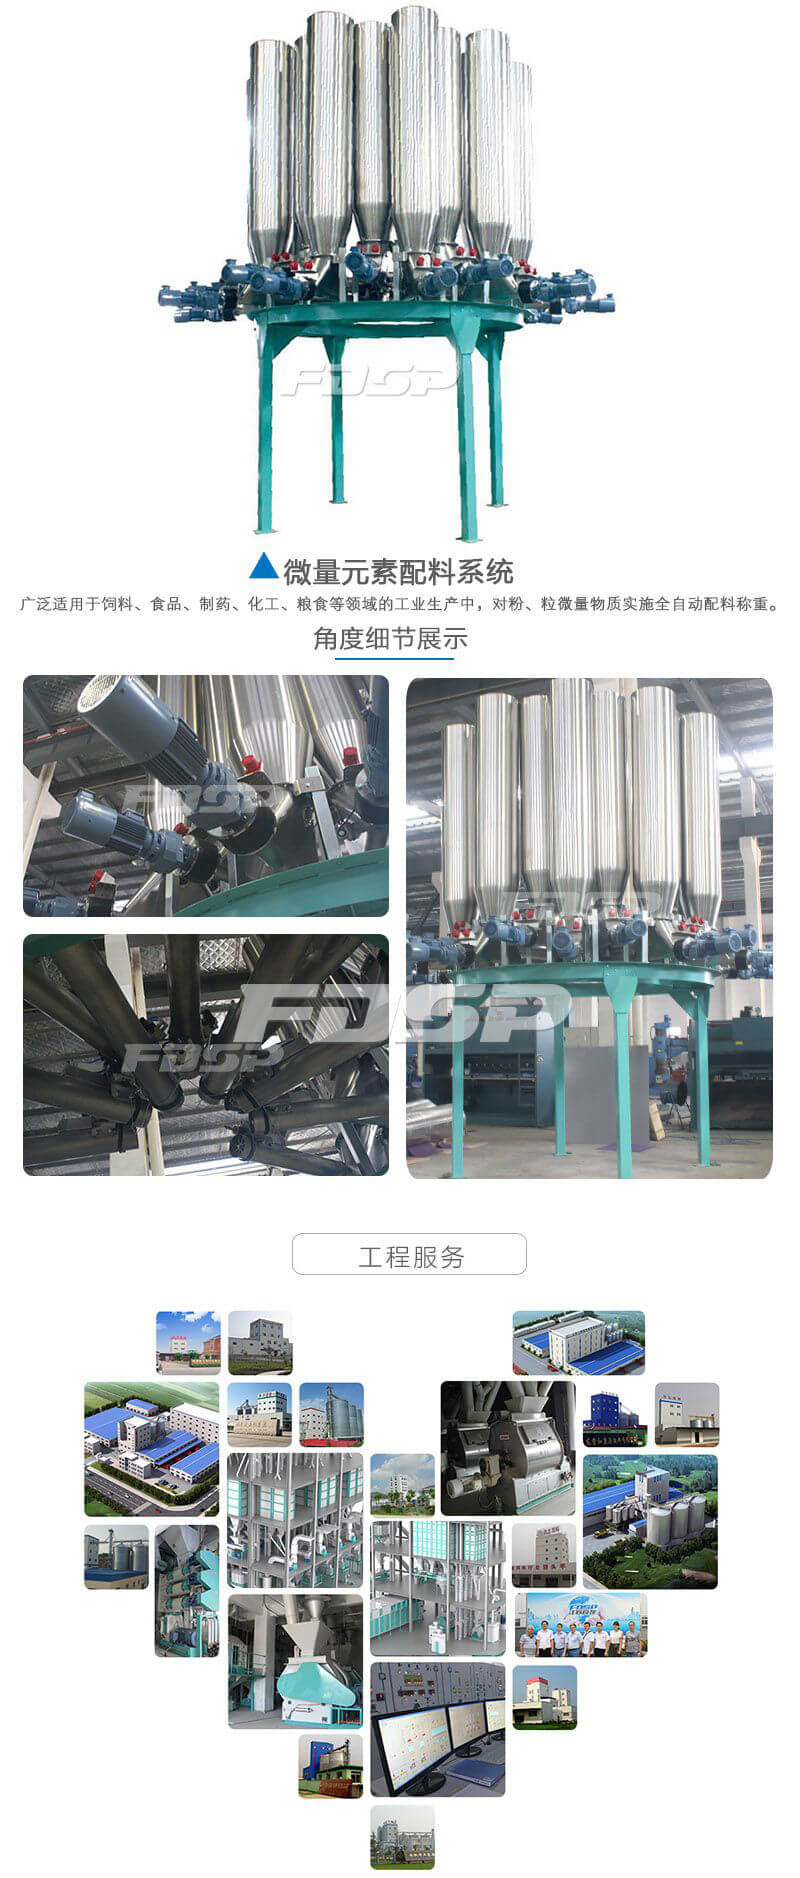 SWLP series trace element batching system